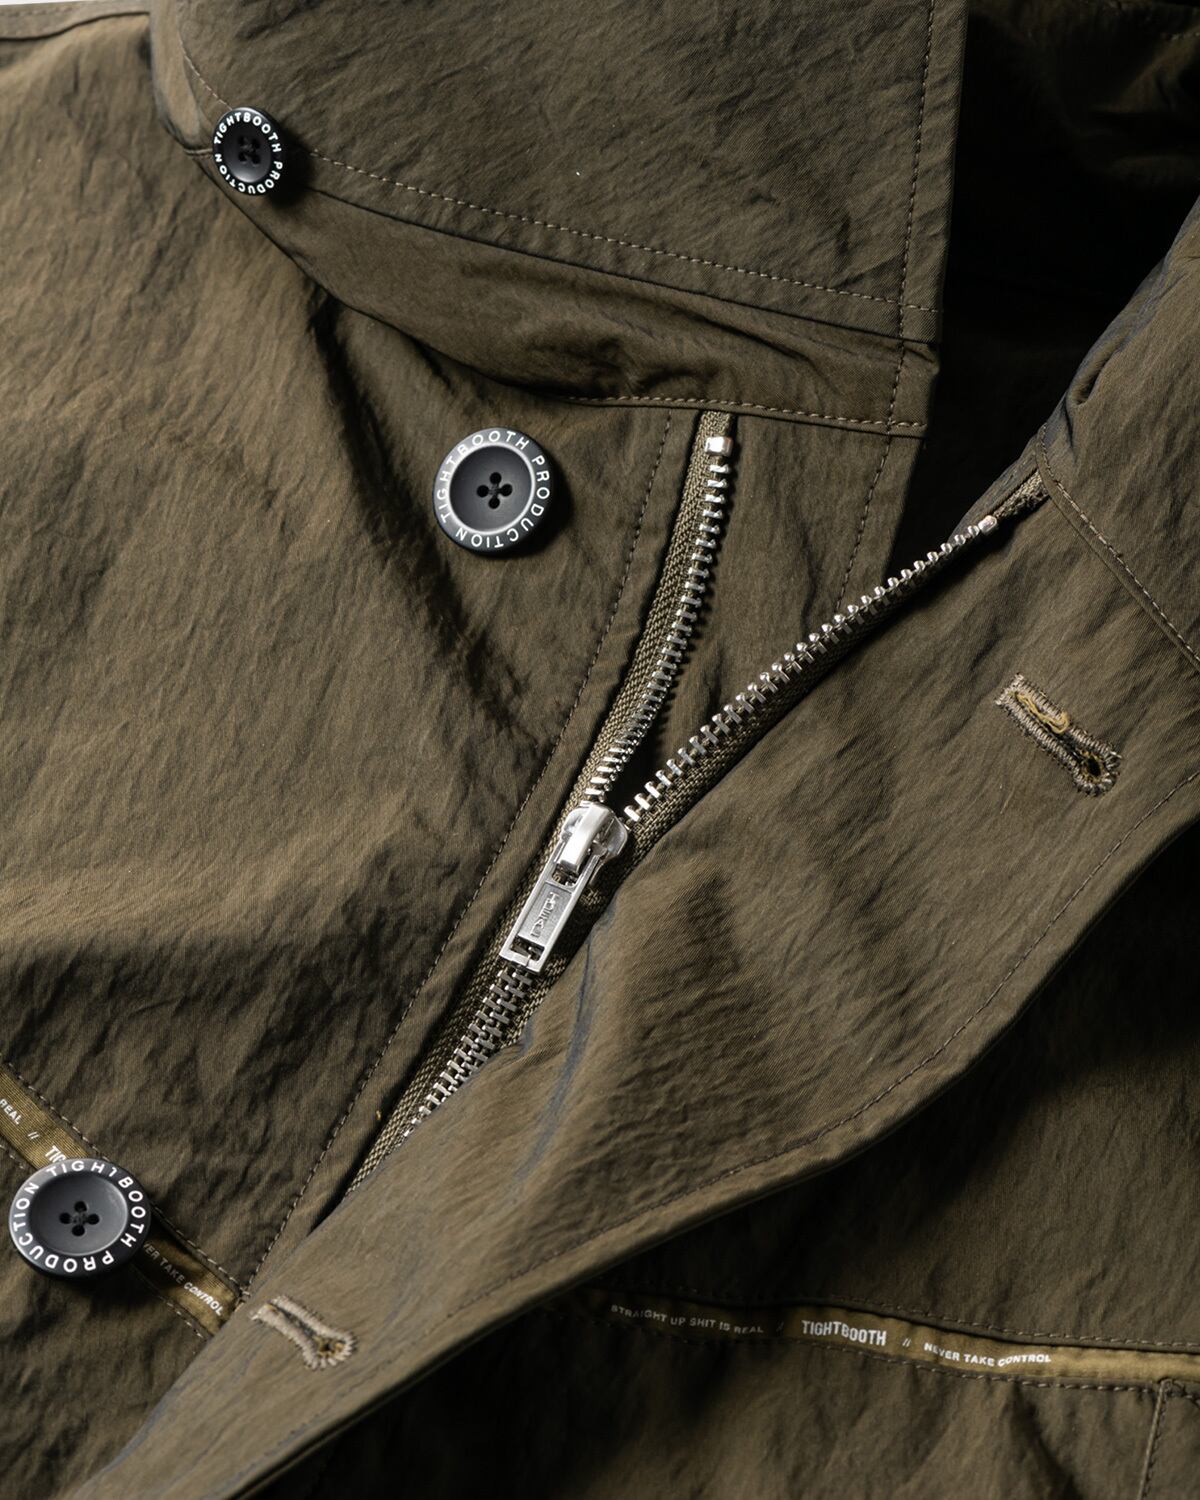 【TIGHTBOOTH】HUNTING JKT(Olive)〈送料無料〉 | STORY